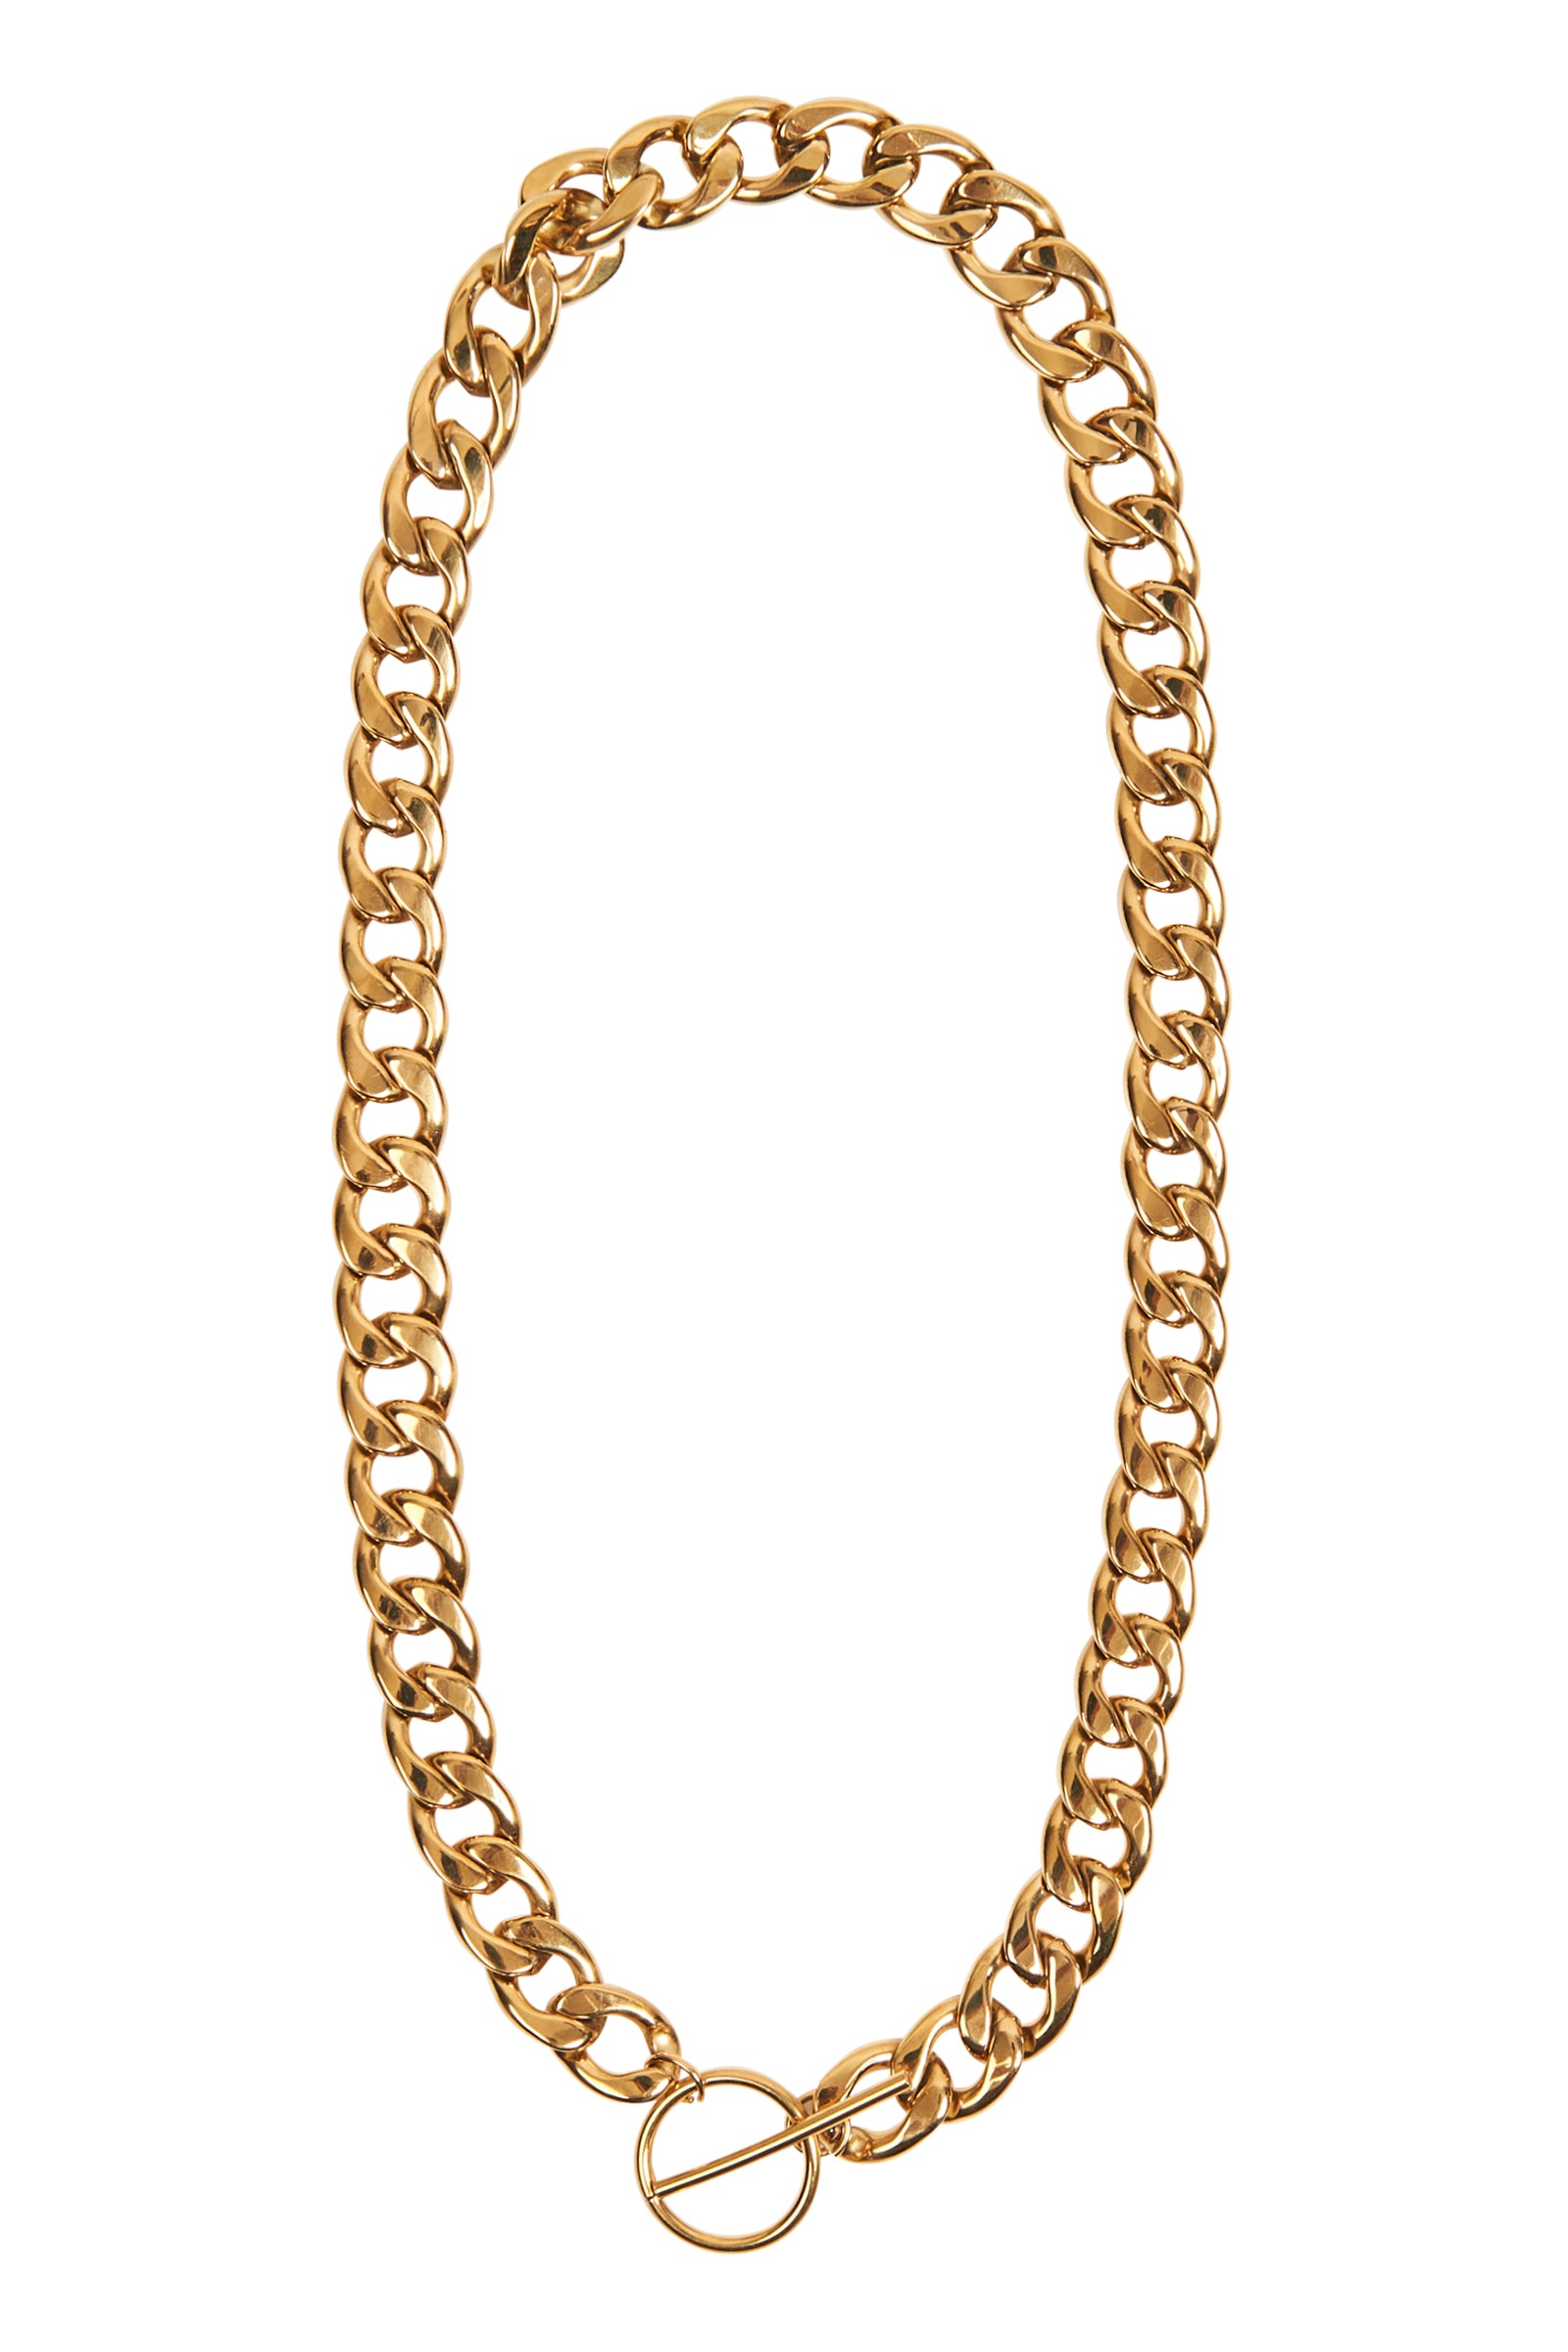 Meta Chain Necklace - Gold - eb&ive Necklace